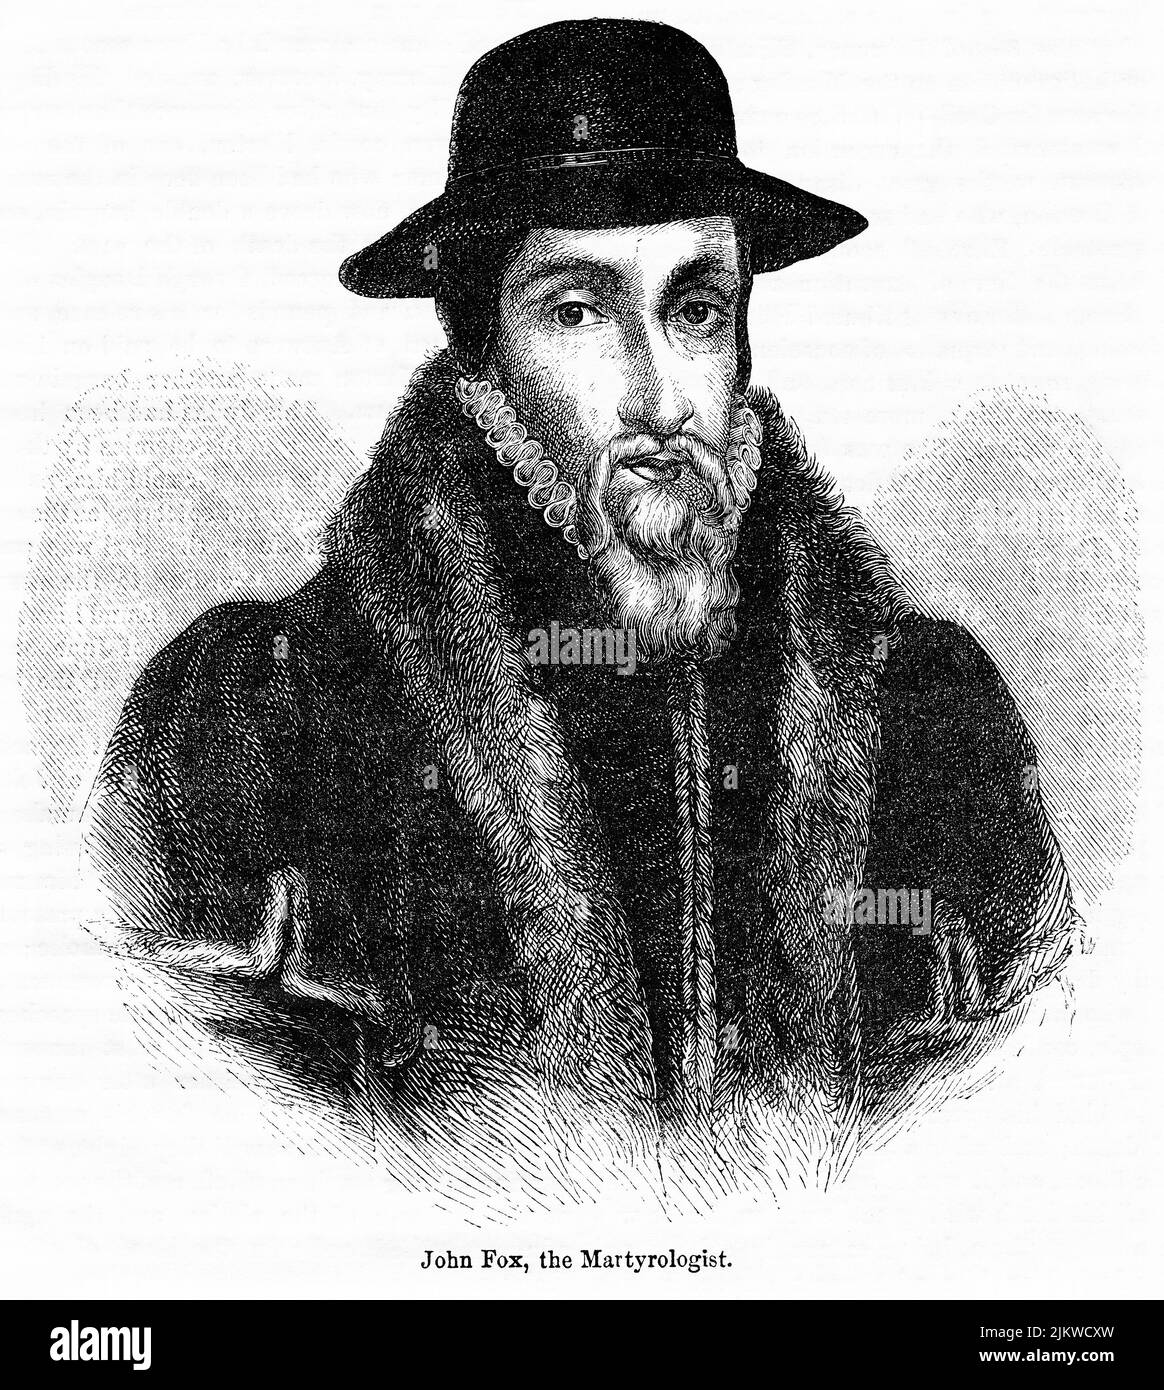 John Fox (Foxe), the Martyrologist, Illustration from the Book, 'John Cassel’s Illustrated History of England, Volume II', text by William Howitt, Cassell, Petter, and Galpin, London, 1858 Stock Photo